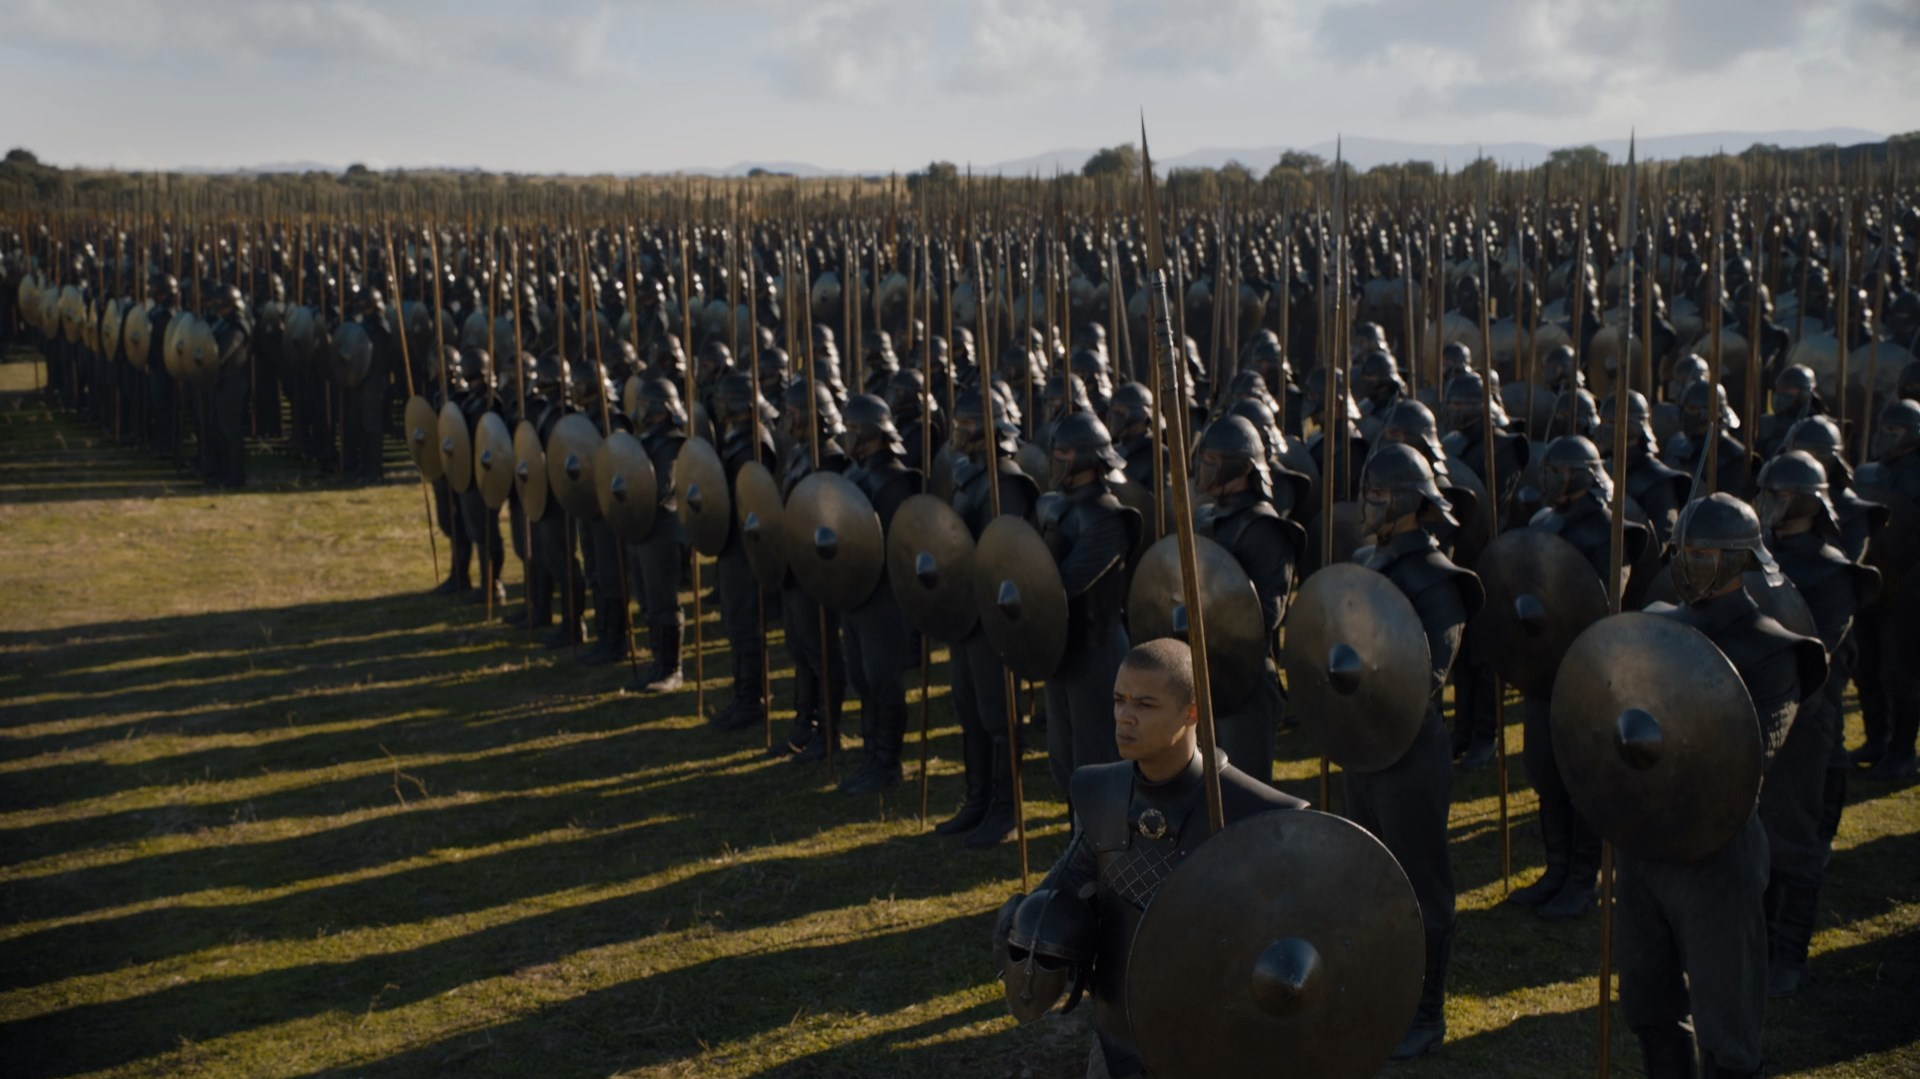 ⚔️ Everyone Has a “Game of Thrones” Kingdom They Belong in — Here’s Yours the Unsullied